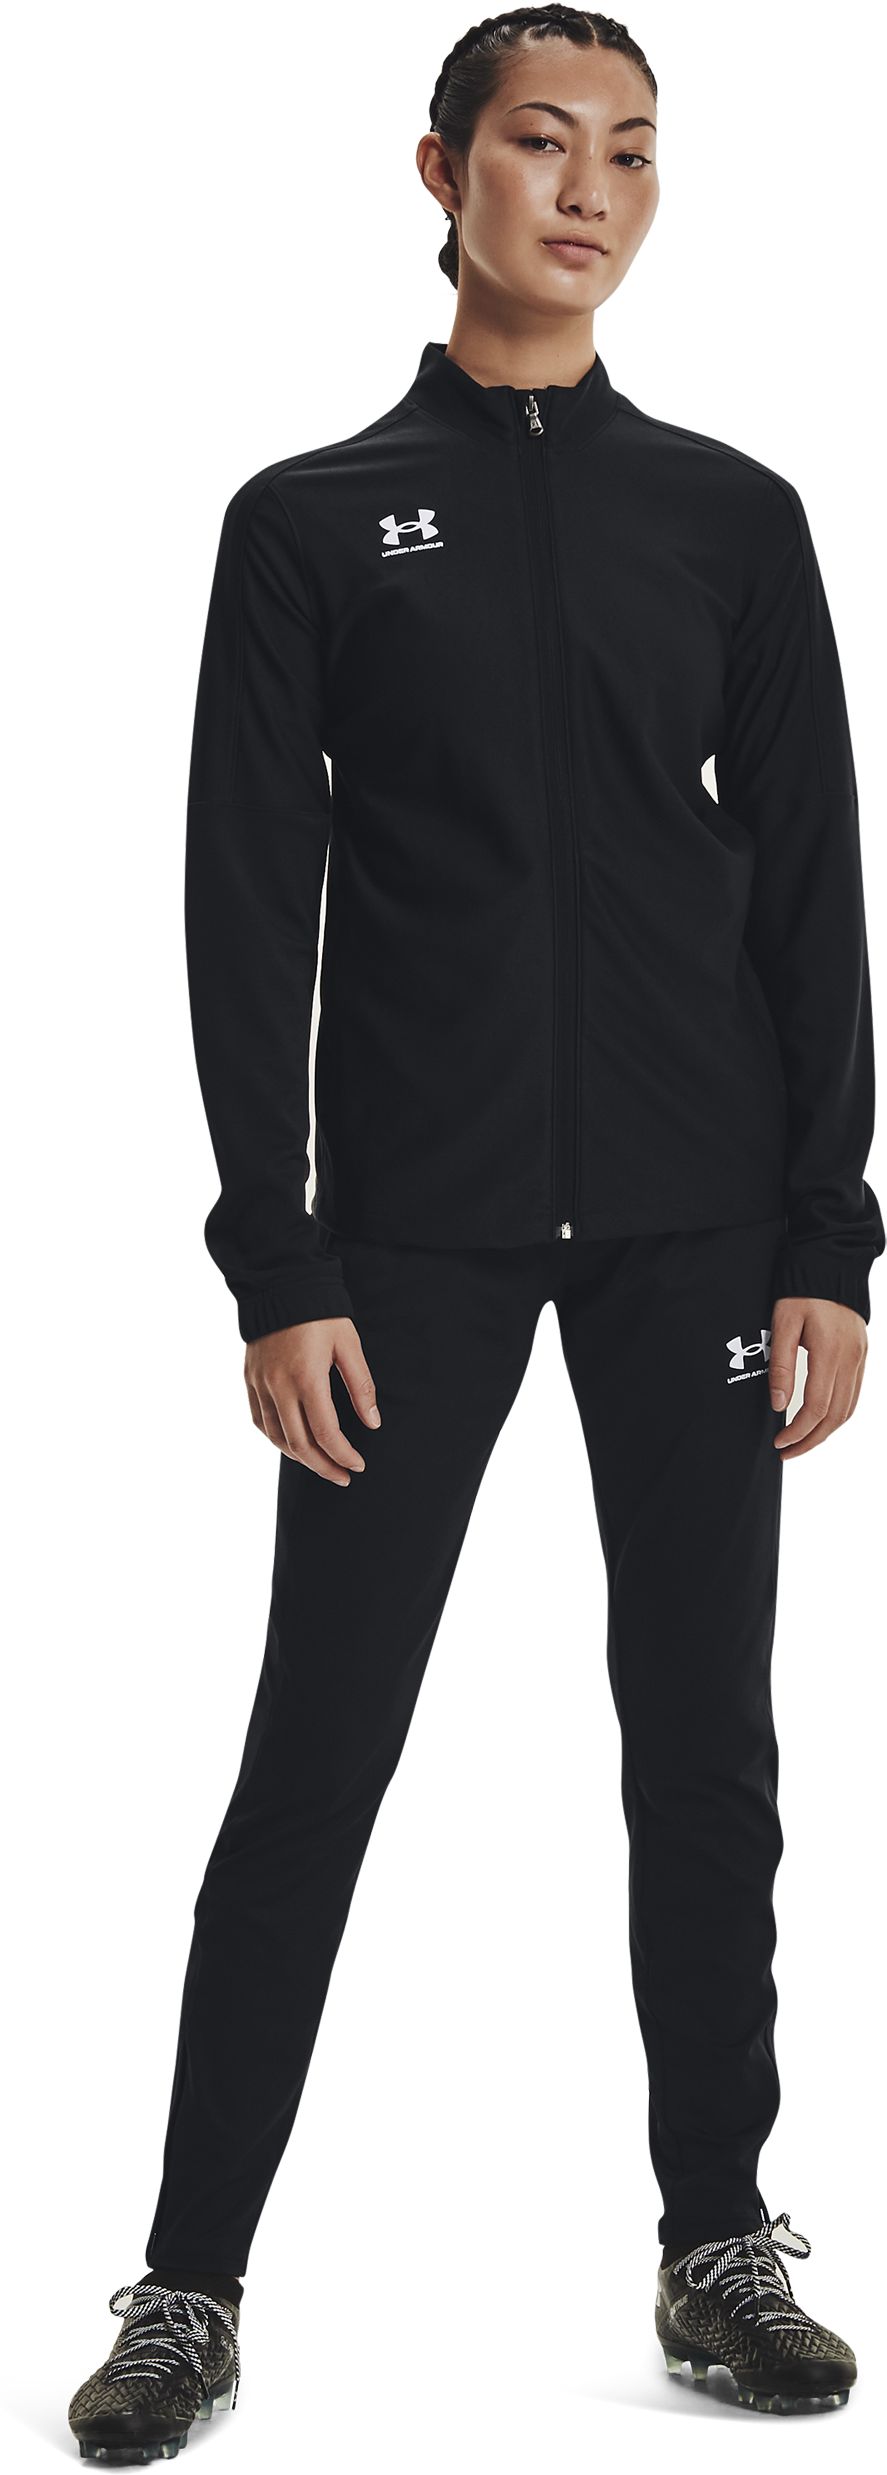 UNDER ARMOUR, W CHALLENGER TRACK JACKET